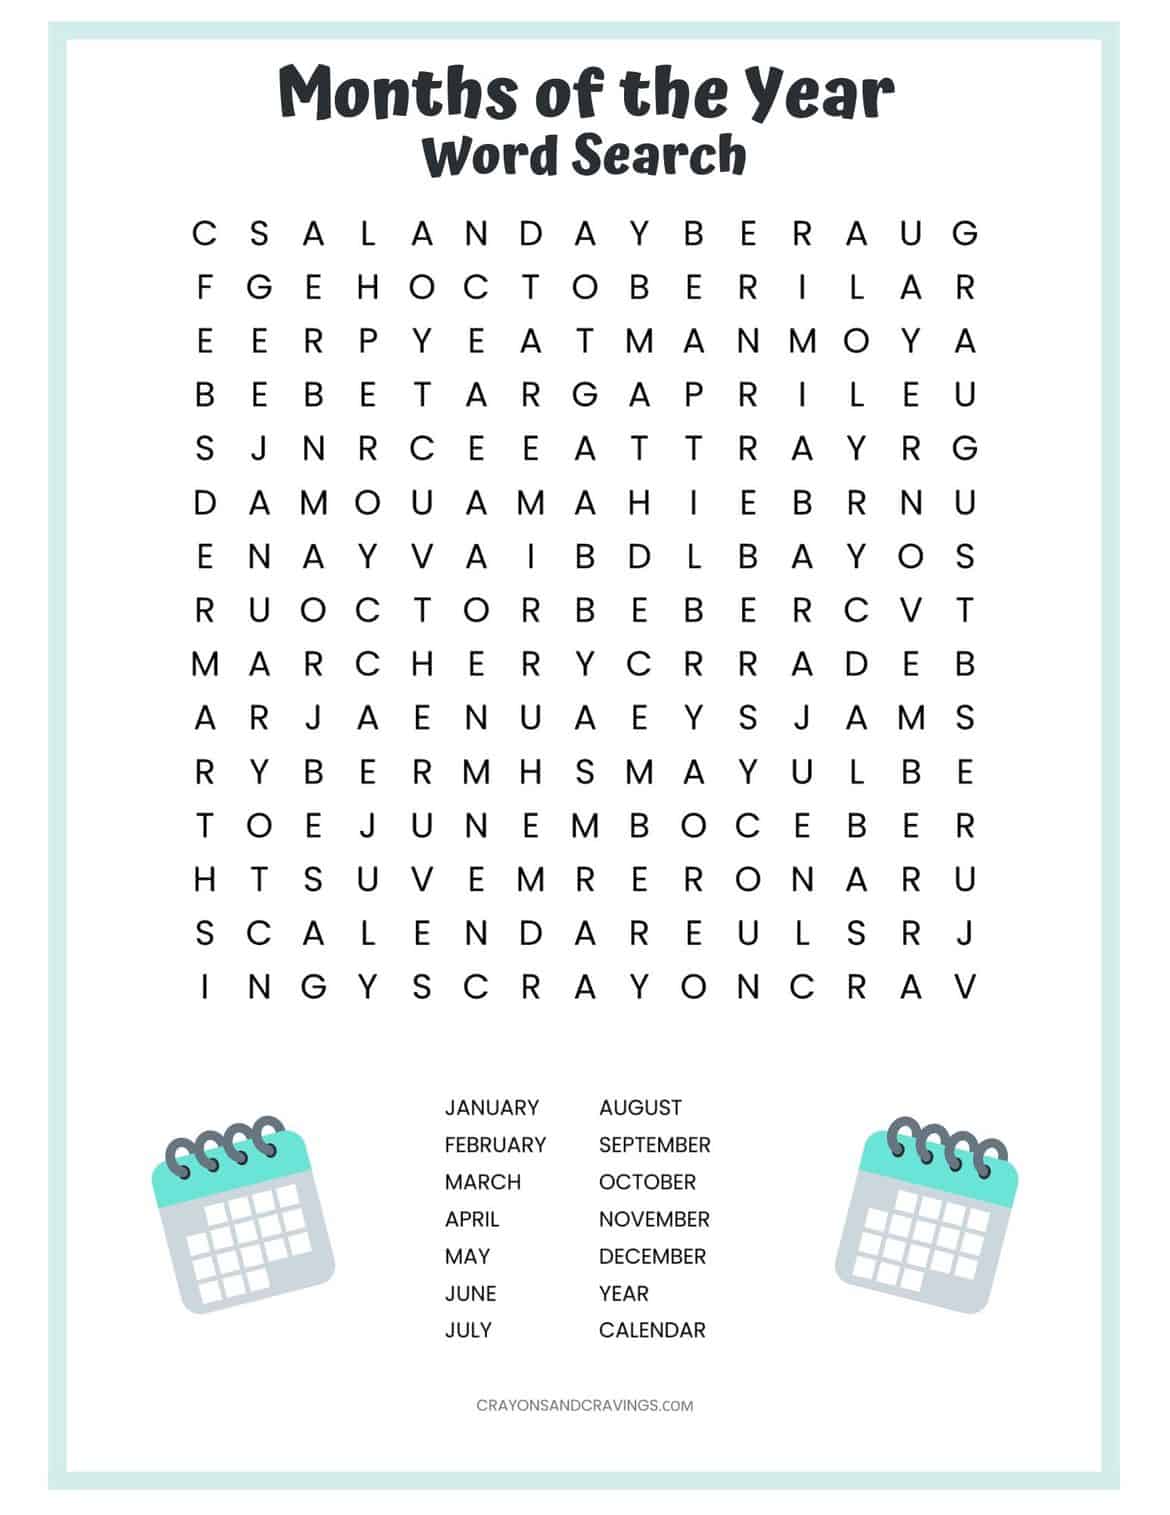 Months of the Year Word Search Free Printable